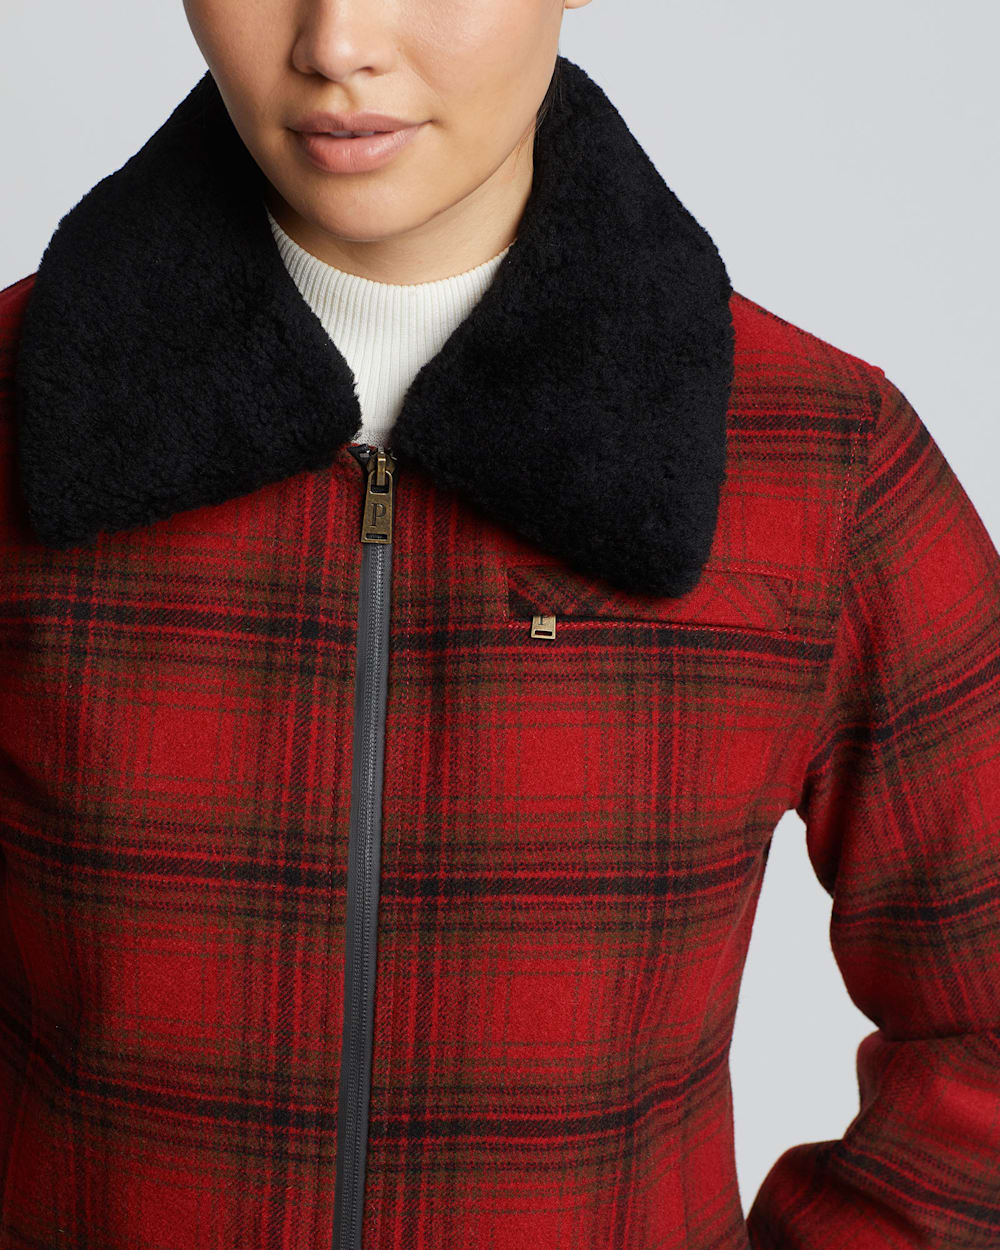 ALTERNATE VIEW OF WOMEN'S LAFAYETTE SHEARLING-COLLAR COAT IN RED/CHARCOAL/DEEP OLIVE PLAID image number 4